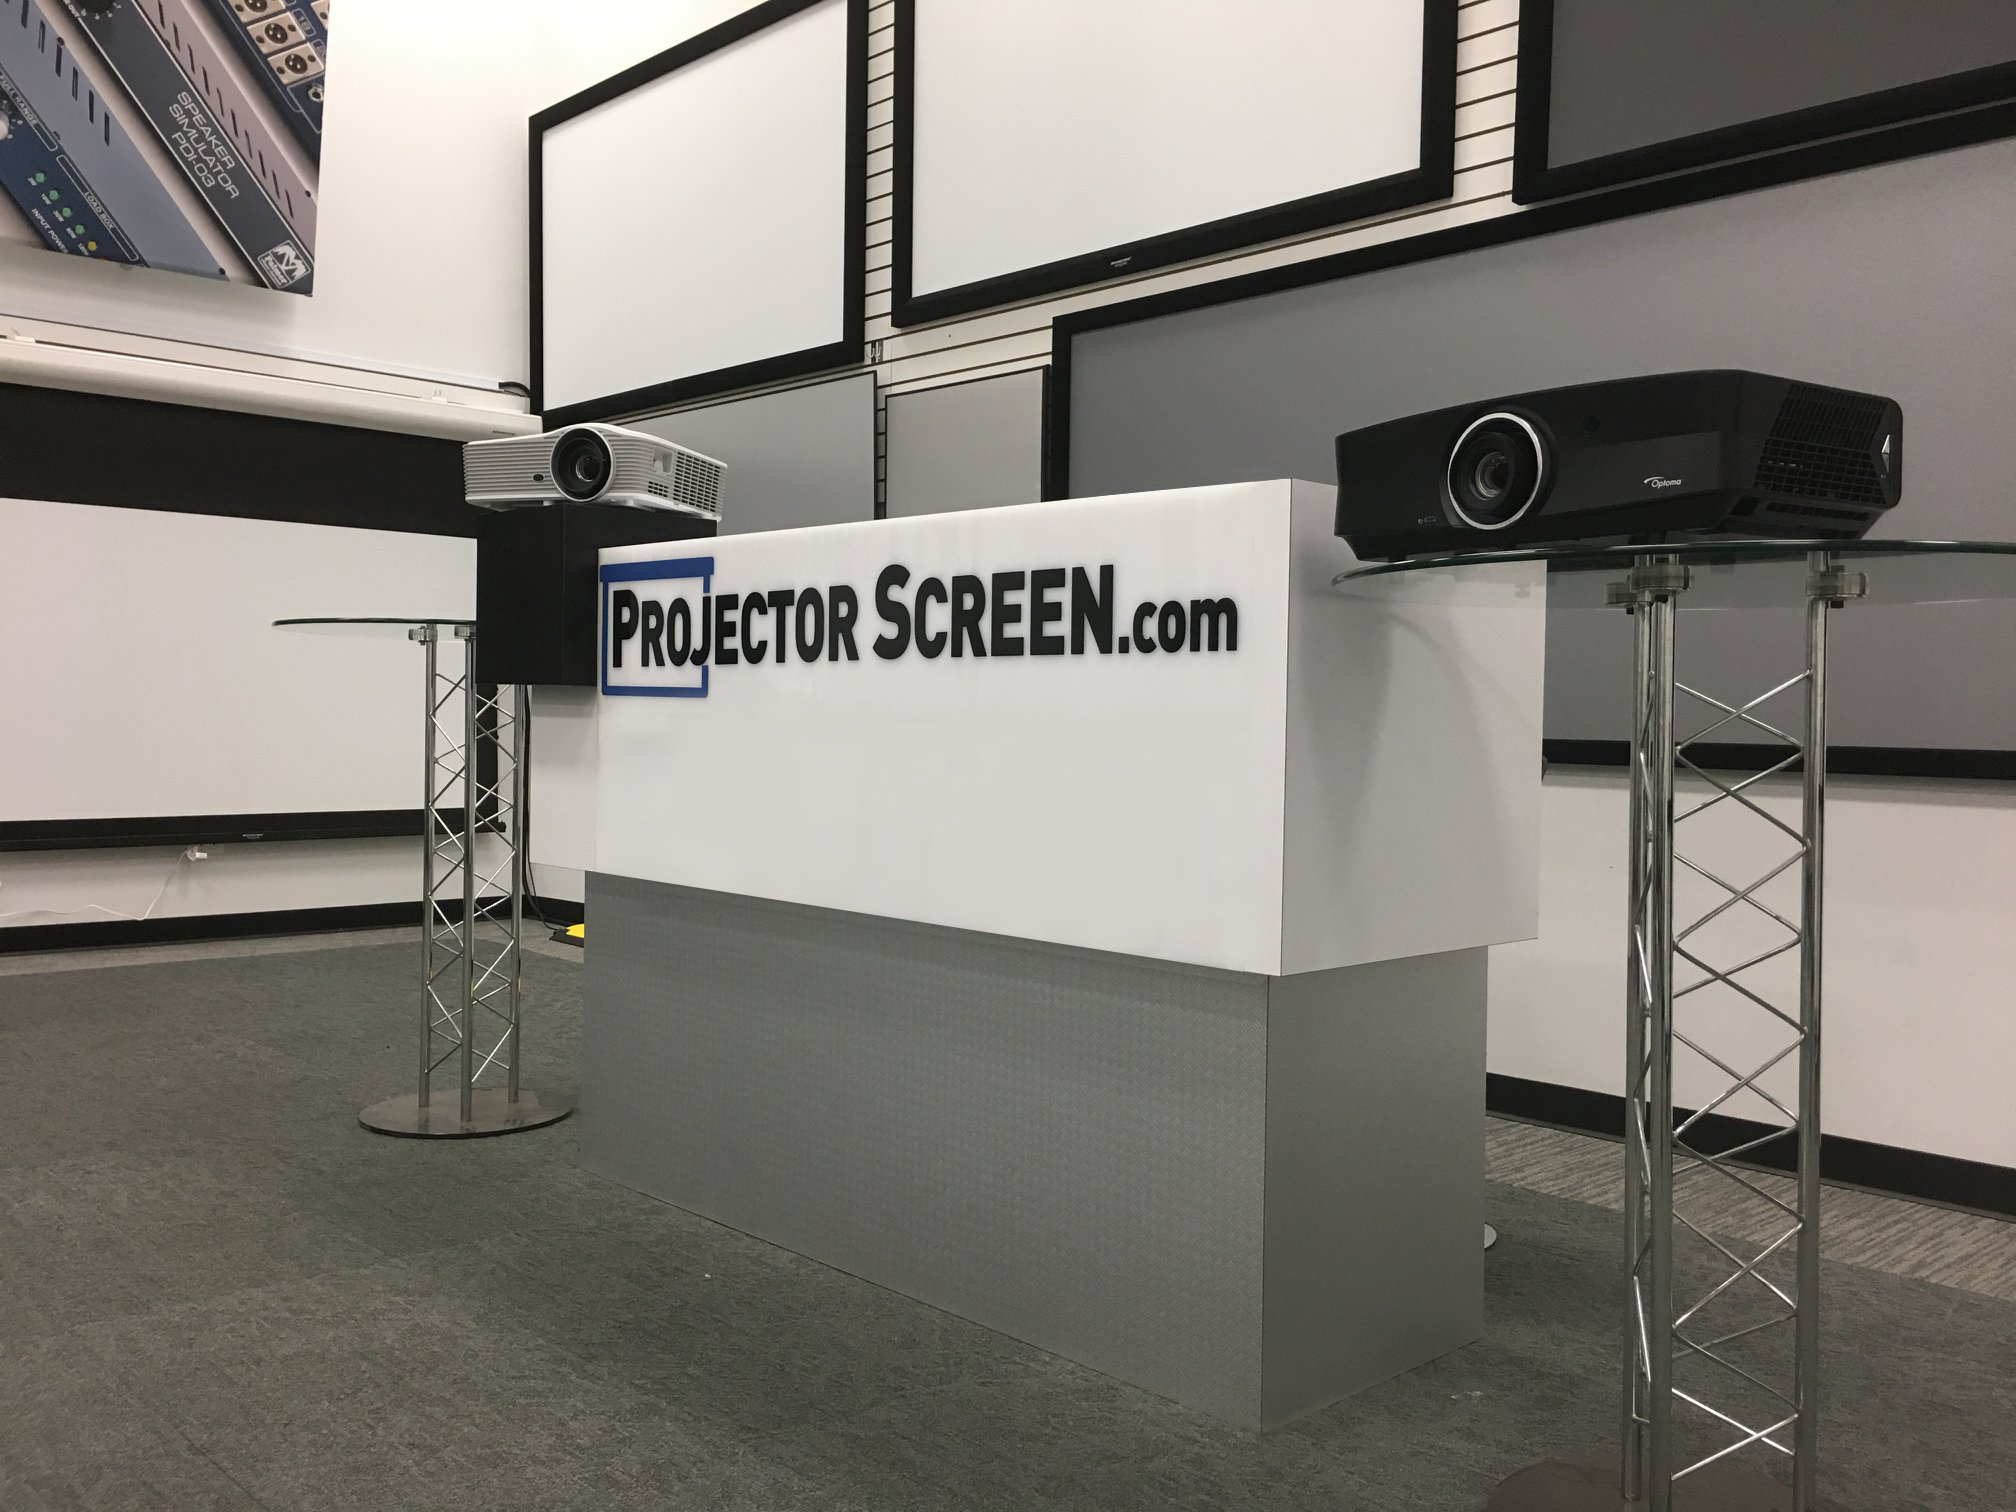 Projector Screen and Projector Sale